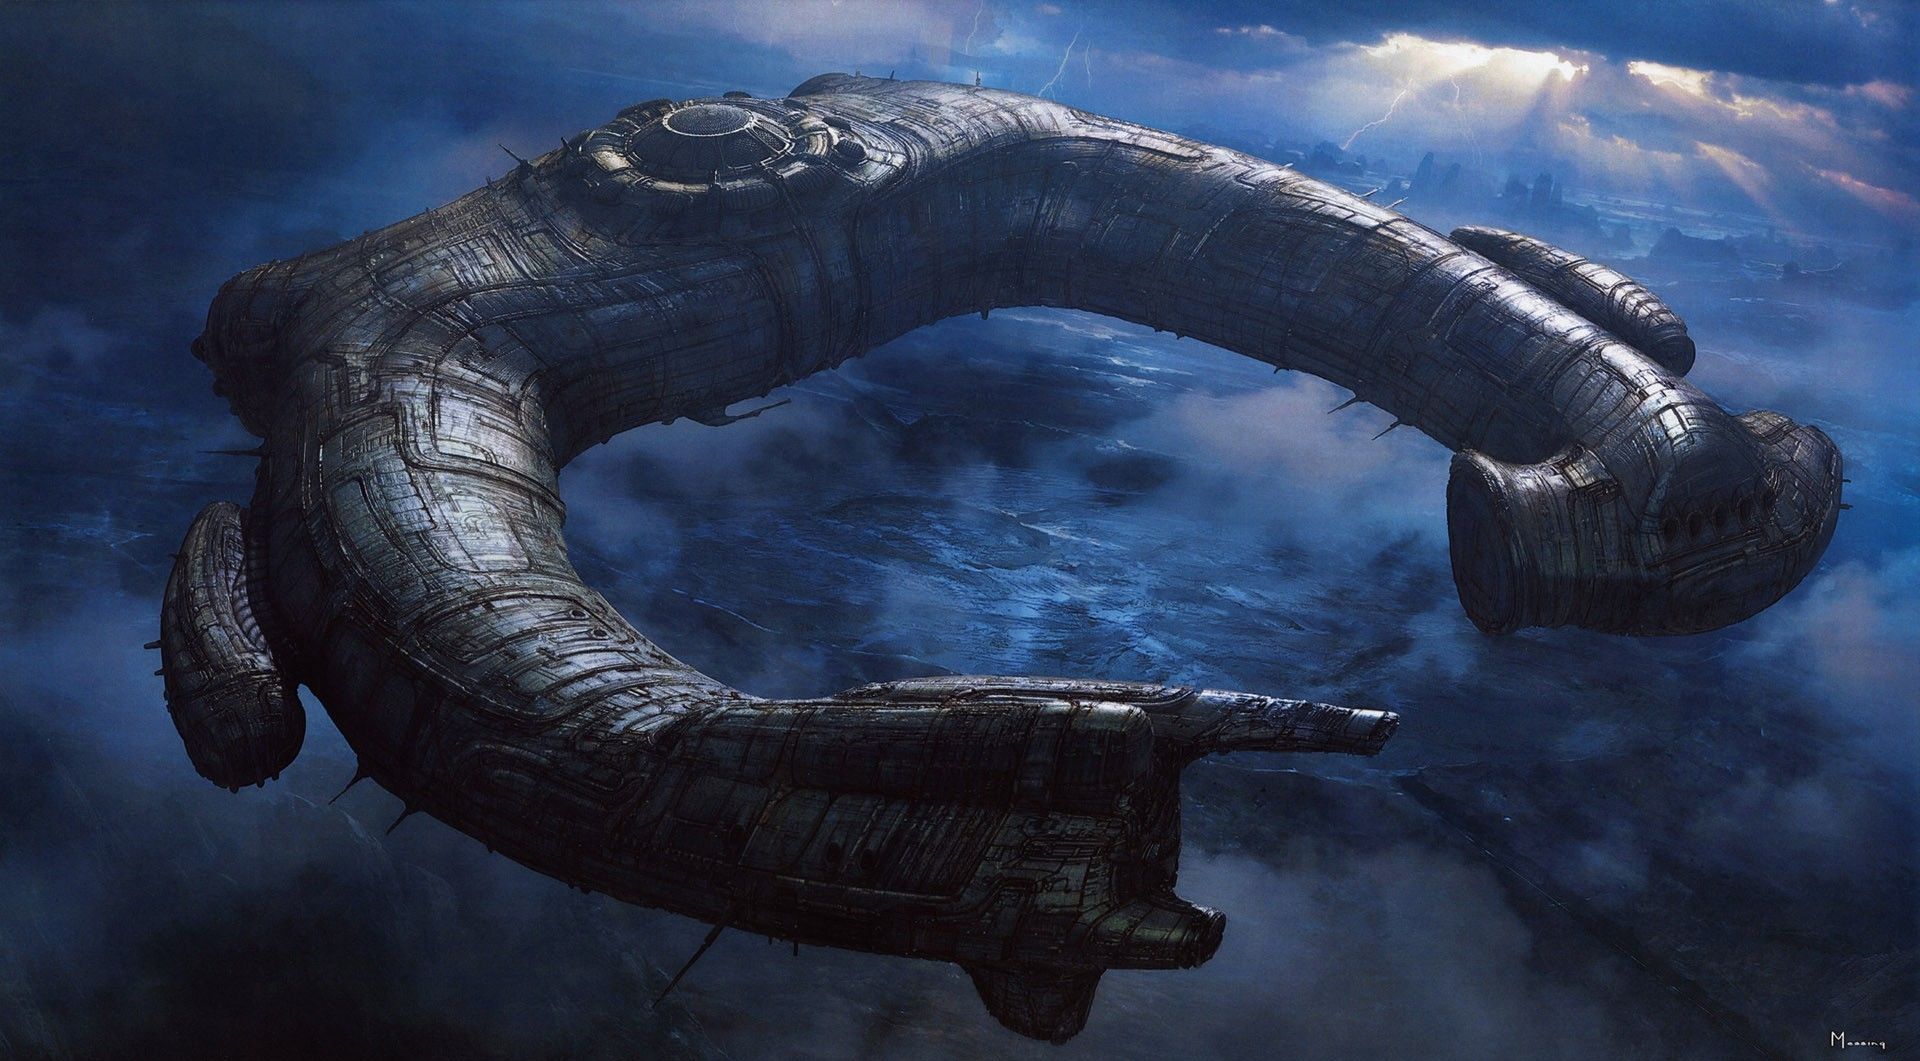 Ridley Scott Prometheus 3 or 4 Will Connect Back to Alien Franchise